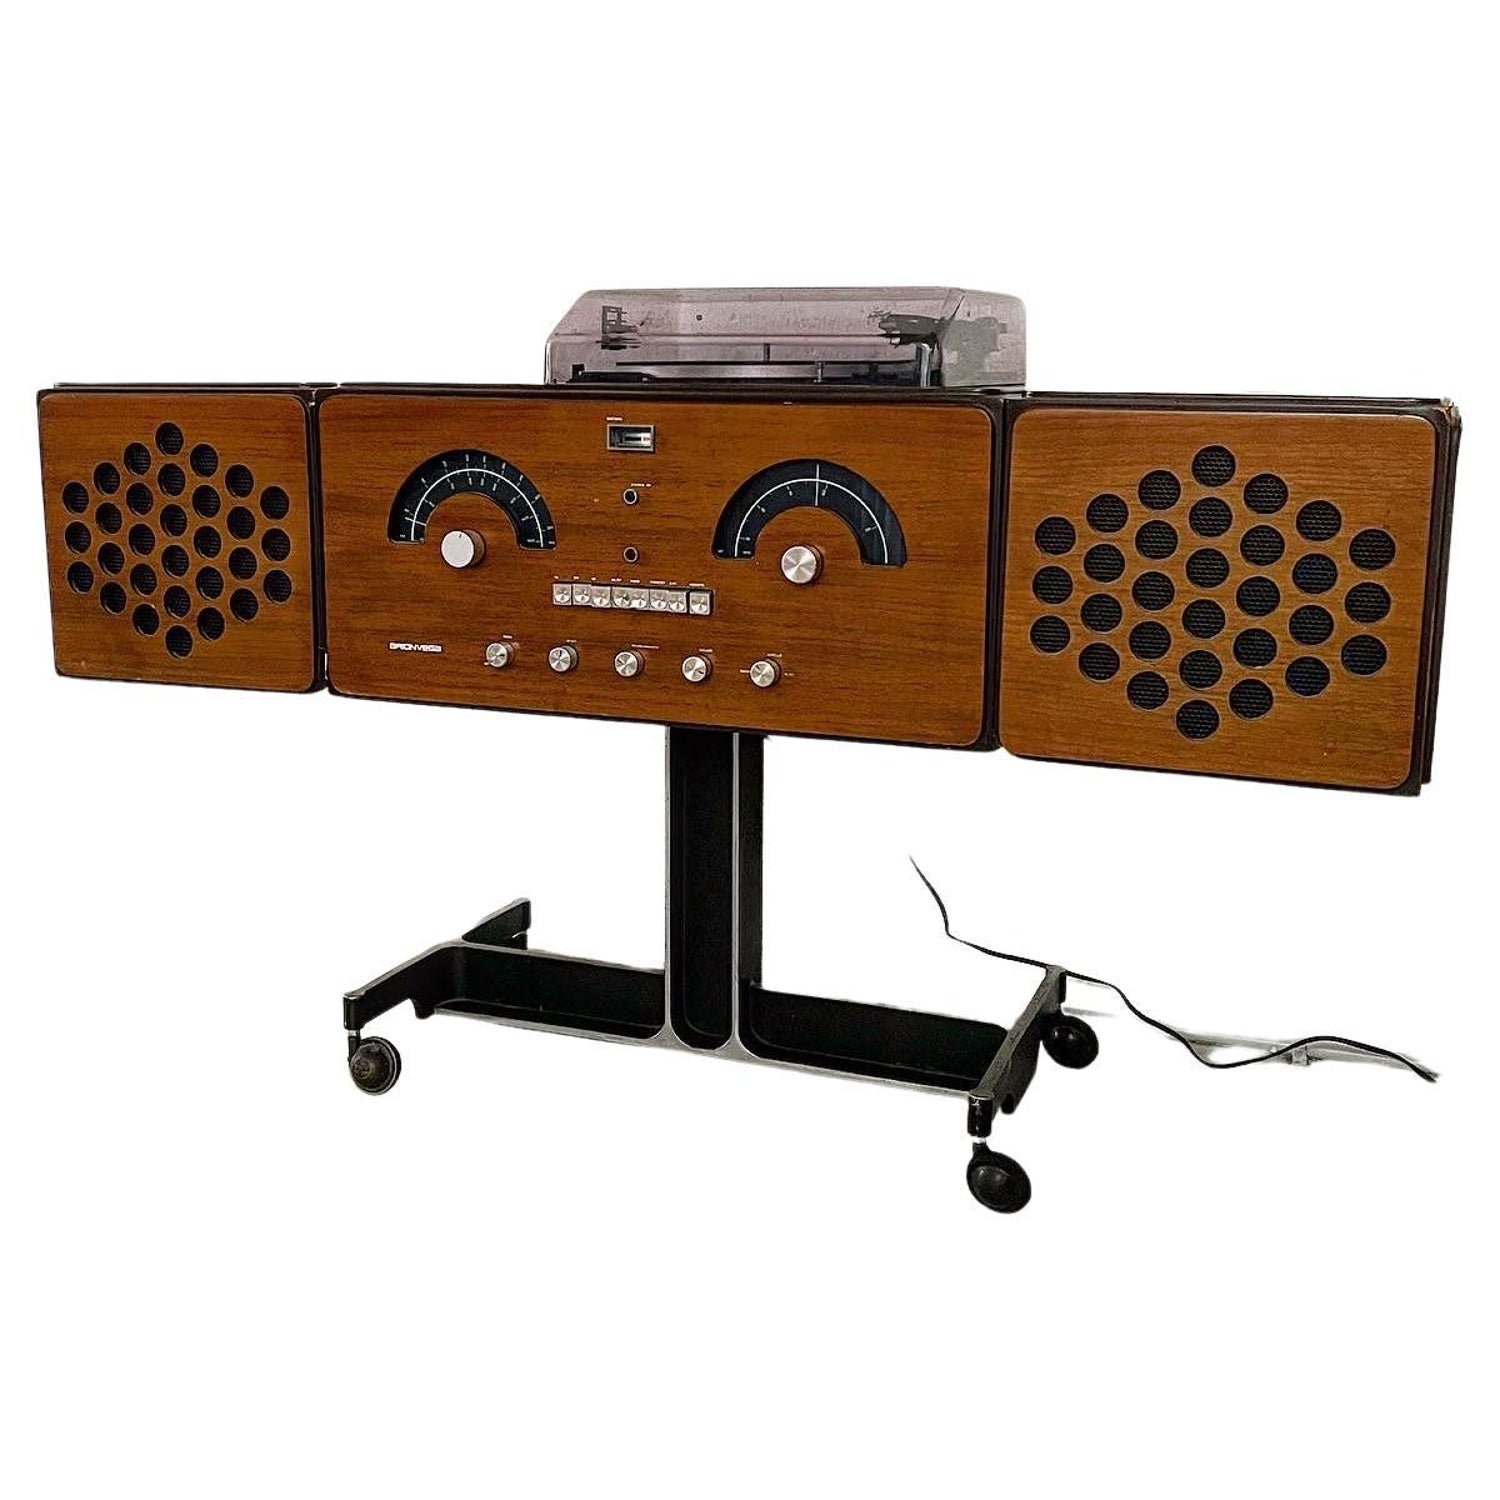 Italian Mid Century Modern RR126 Radio Turntable by the Castiglioni  brothers For Sale at 1stDibs